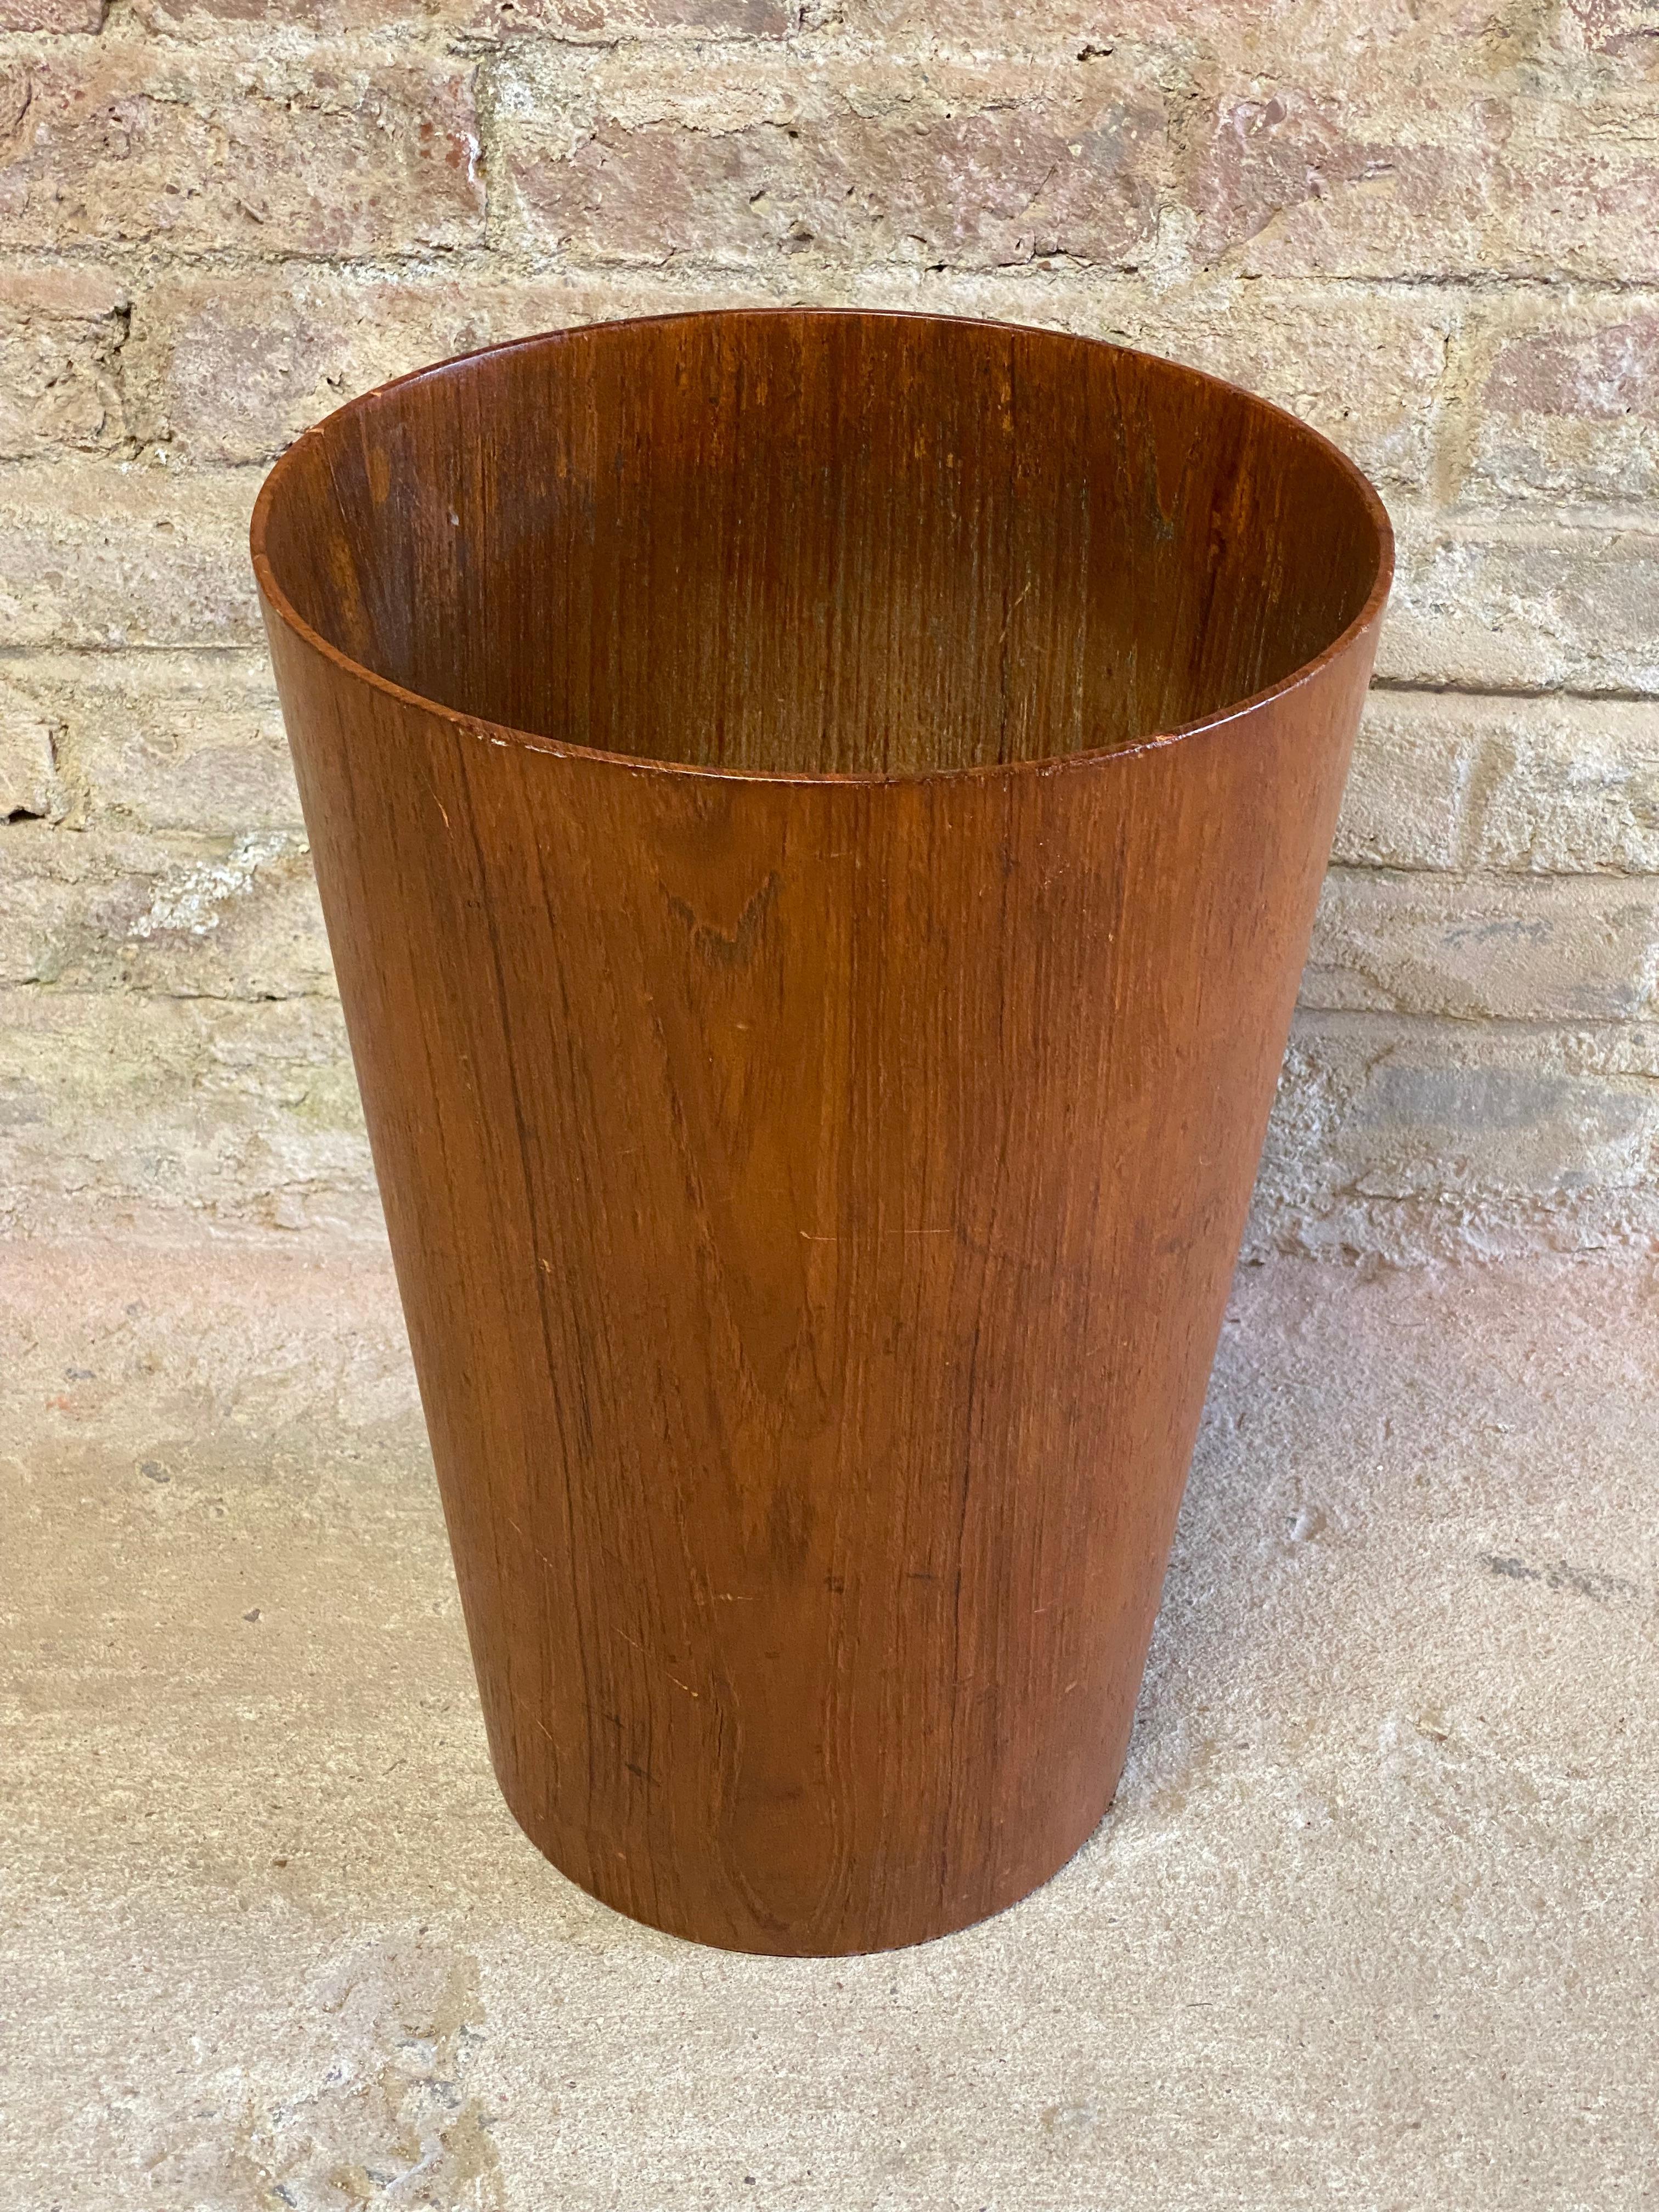 Martin Aberg for Sevex teak waste basket. Fully signed with burn in mark, Servex, Made in Sweden. Circa 1955-60. Good overall condition with some minor scratches and minor veneer losses. No cracks. Structurally sound and sturdy.

Measures: